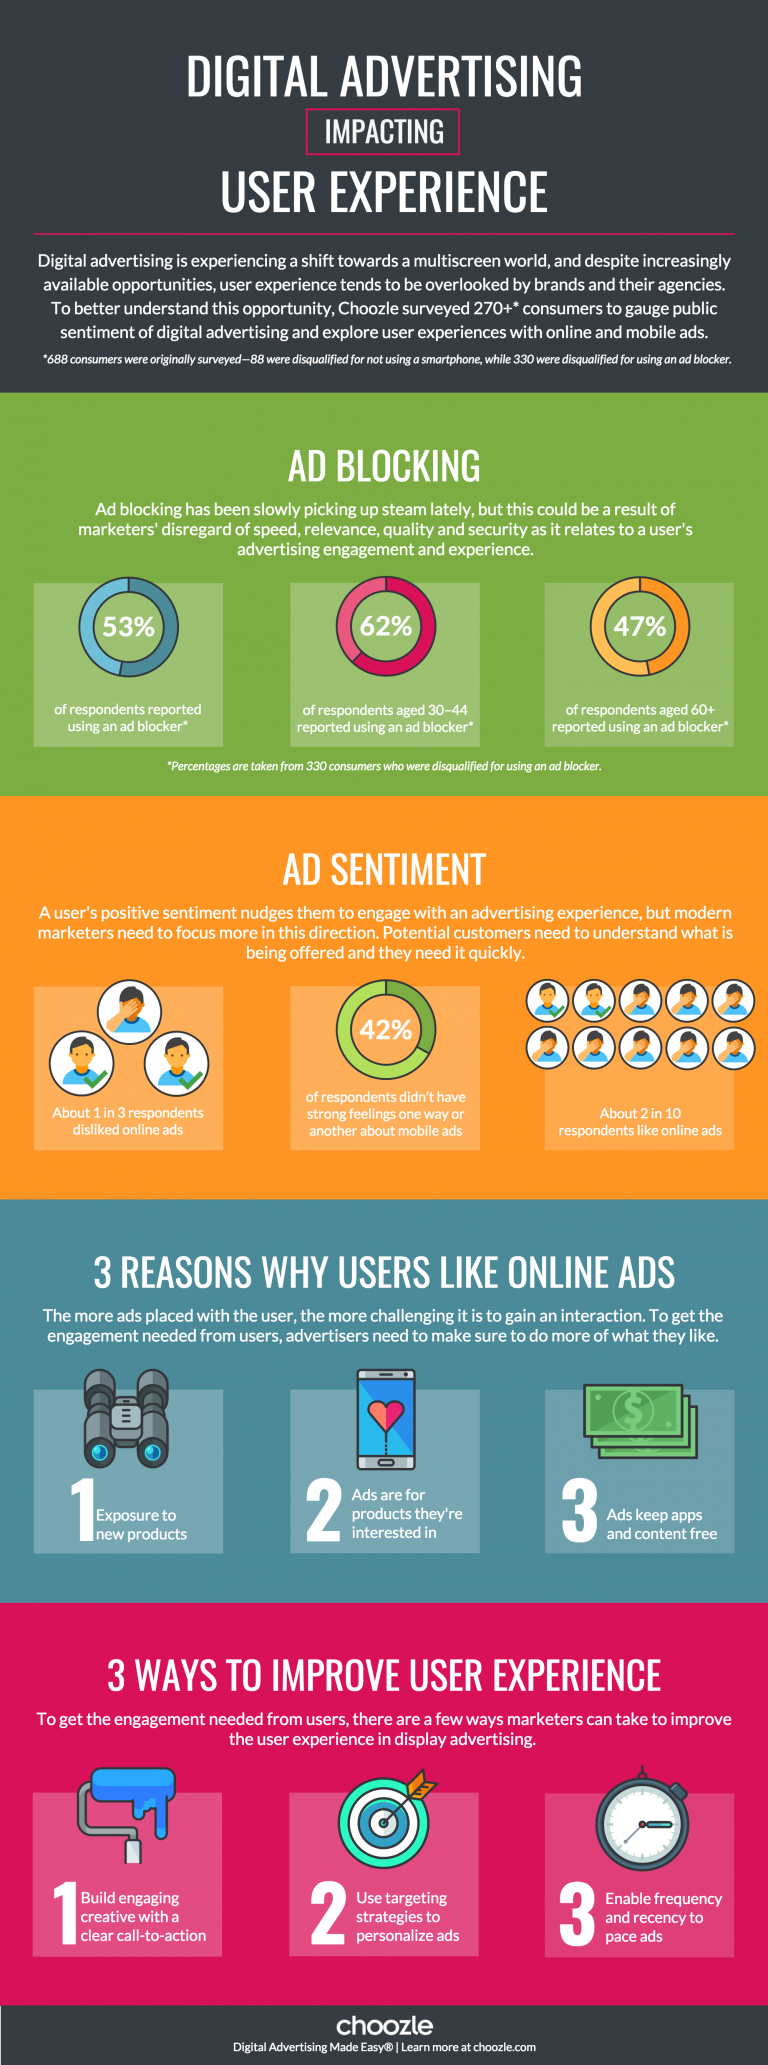 Digital Advertising Impacting User Experience - #Infographic